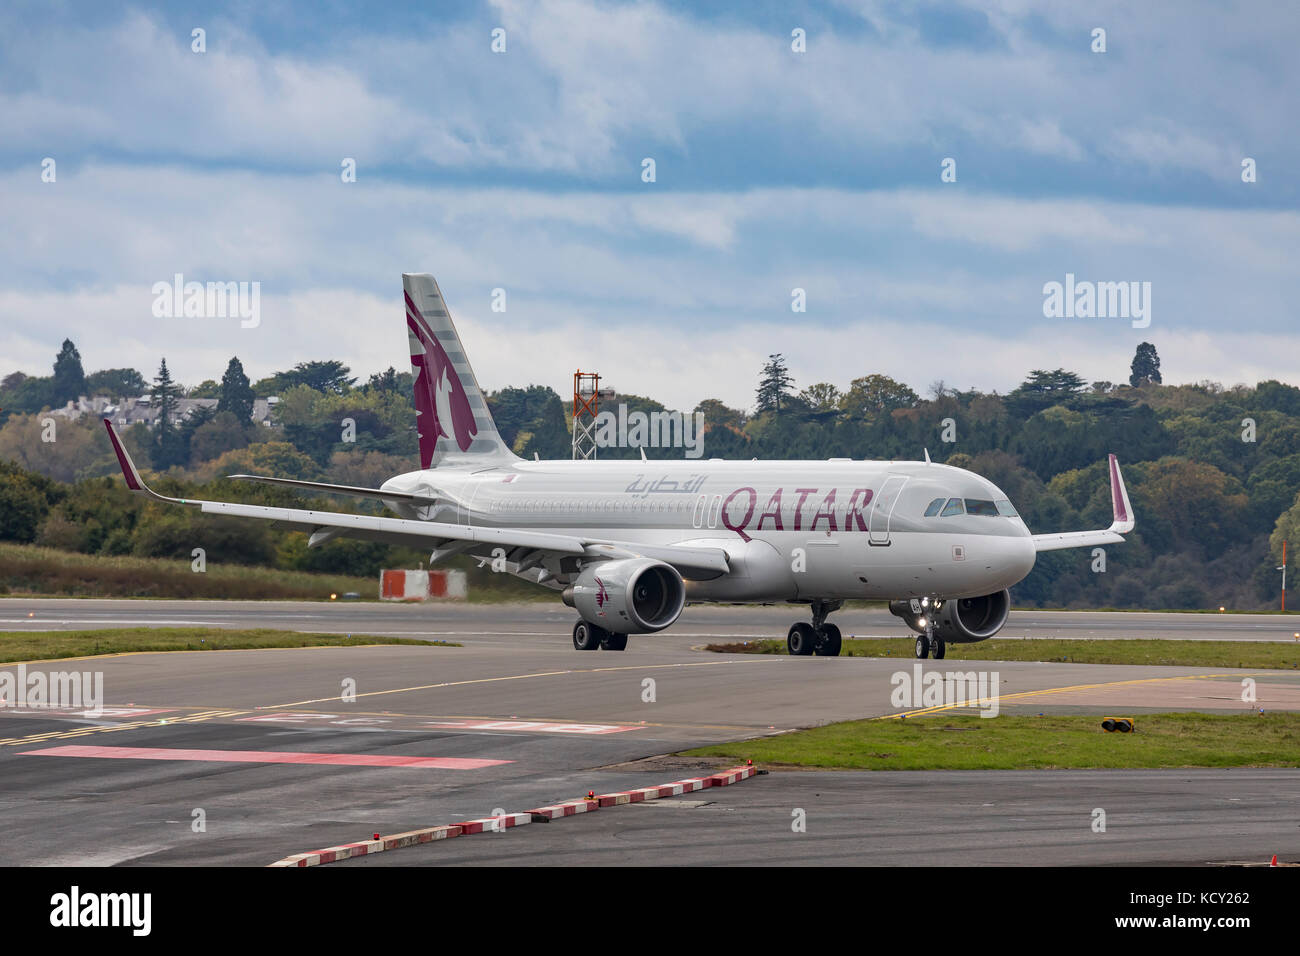 Luton, UK. 7th October, 2017. Qatar Airways Airbus A320 aircraft, A7-LAH, at London Luton Airport having just arrived from Mahon as part of the Civil Aviation Authority's flying programme to bring back passengers following the administration of Monarch Airlines. Credit: Nick Whittle/Alamy Live News Stock Photo